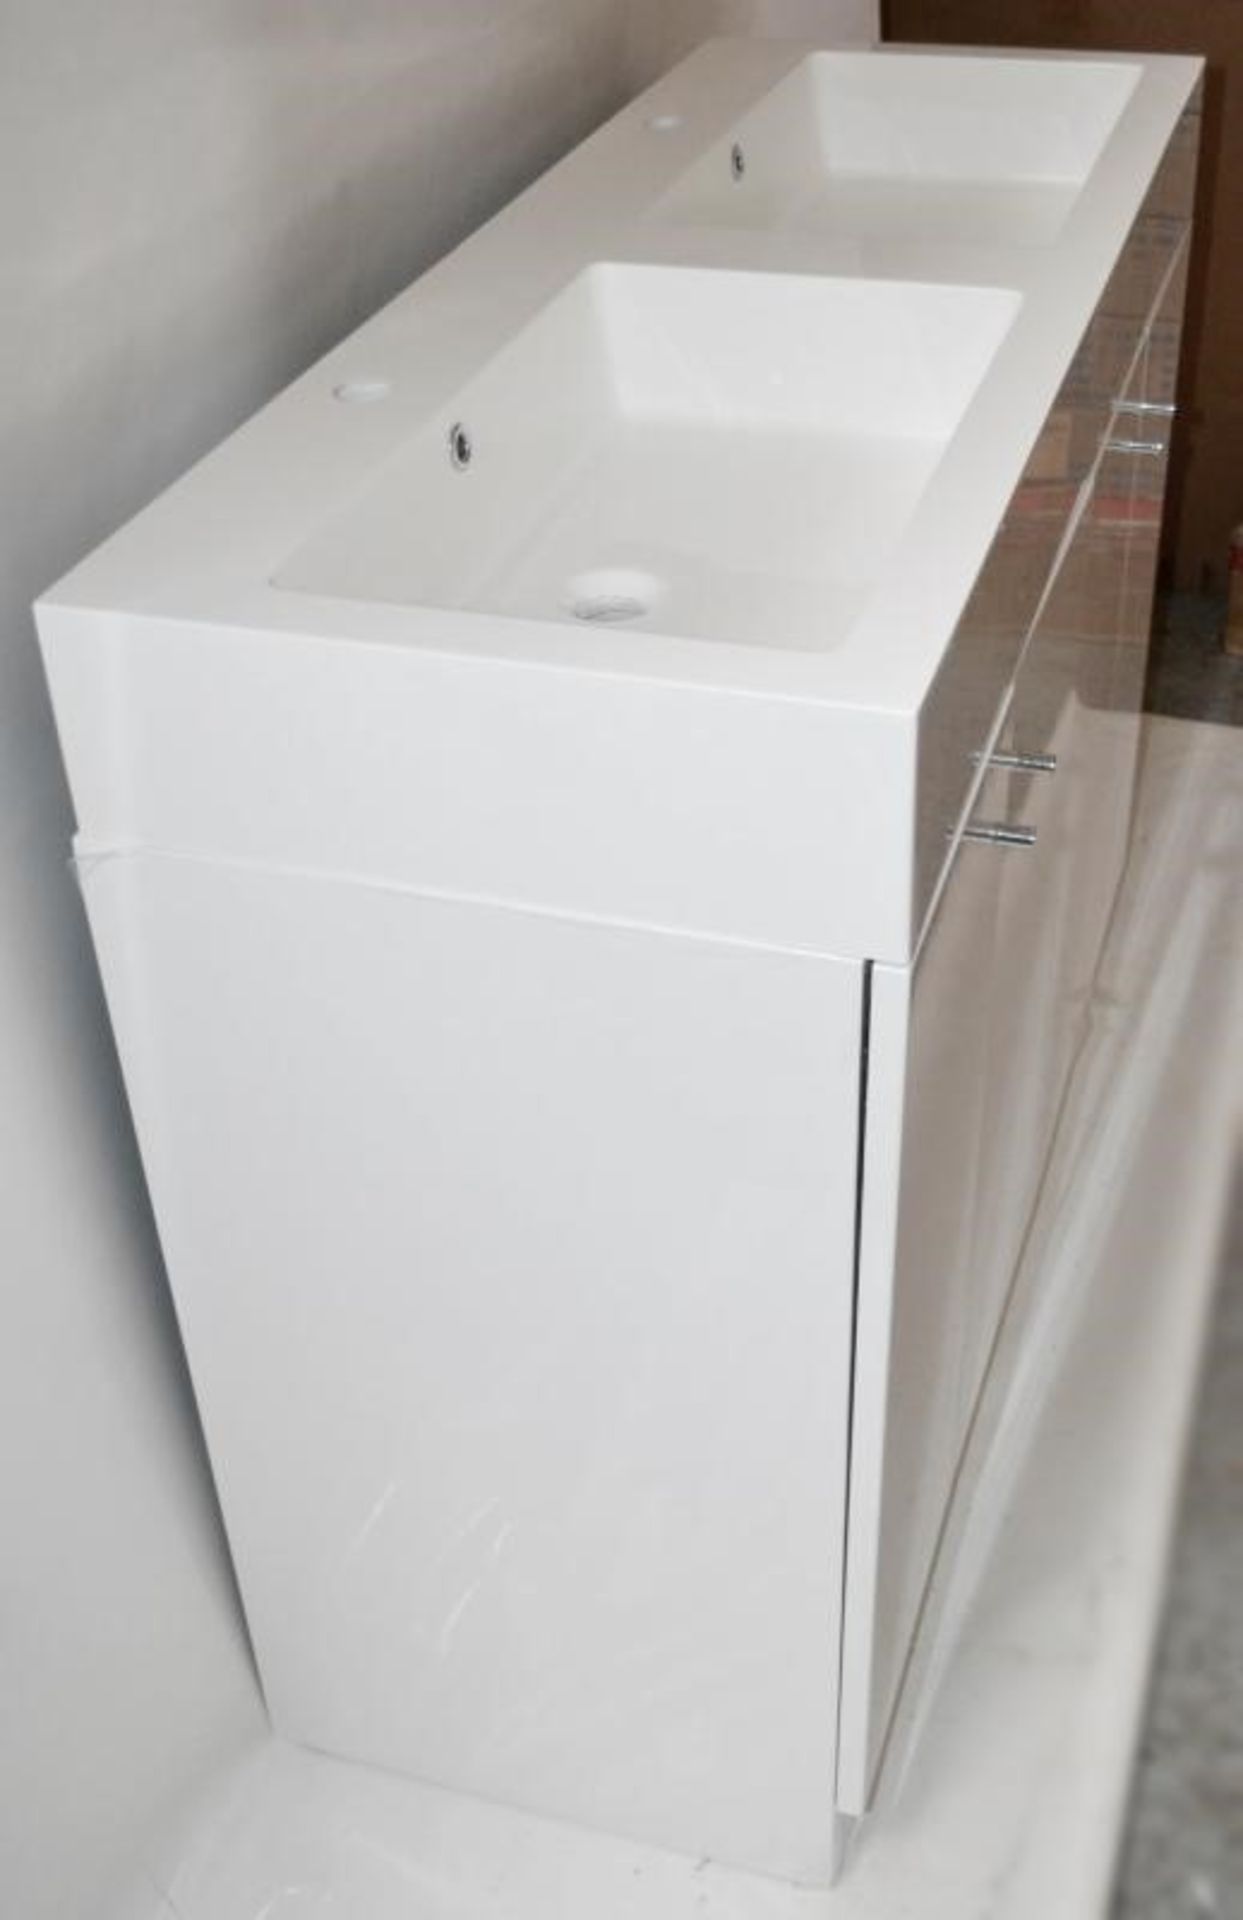 1 x Gloss White 1200mm 4-Door Double Basin Freestanding Bathroom Cabinet - New & Boxed Stock - CL307 - Image 5 of 6